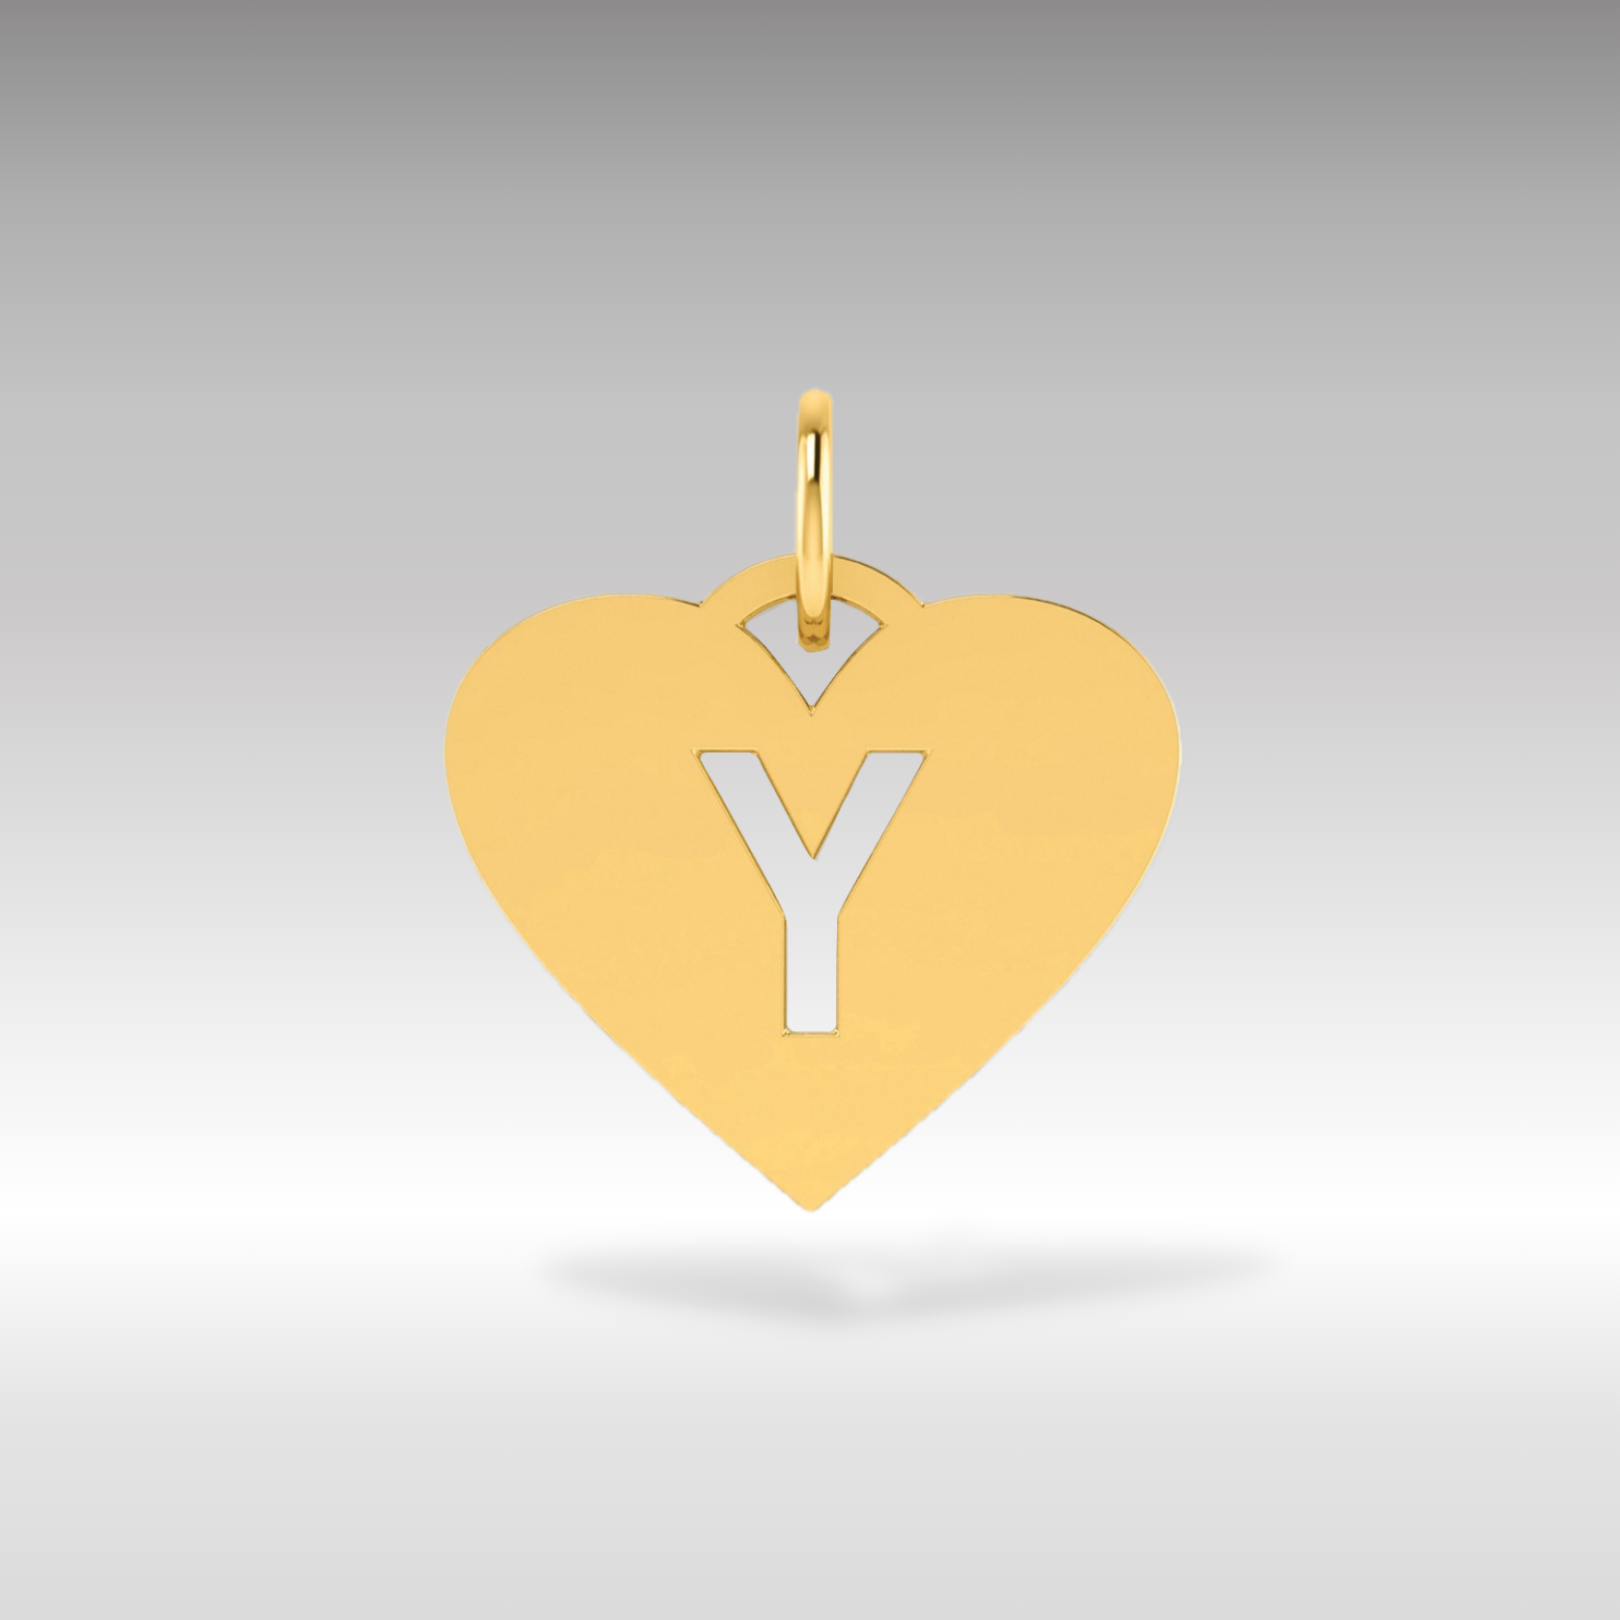 14K Gold Heart Pendant with Letter 'Y' - Charlie & Co. Jewelry